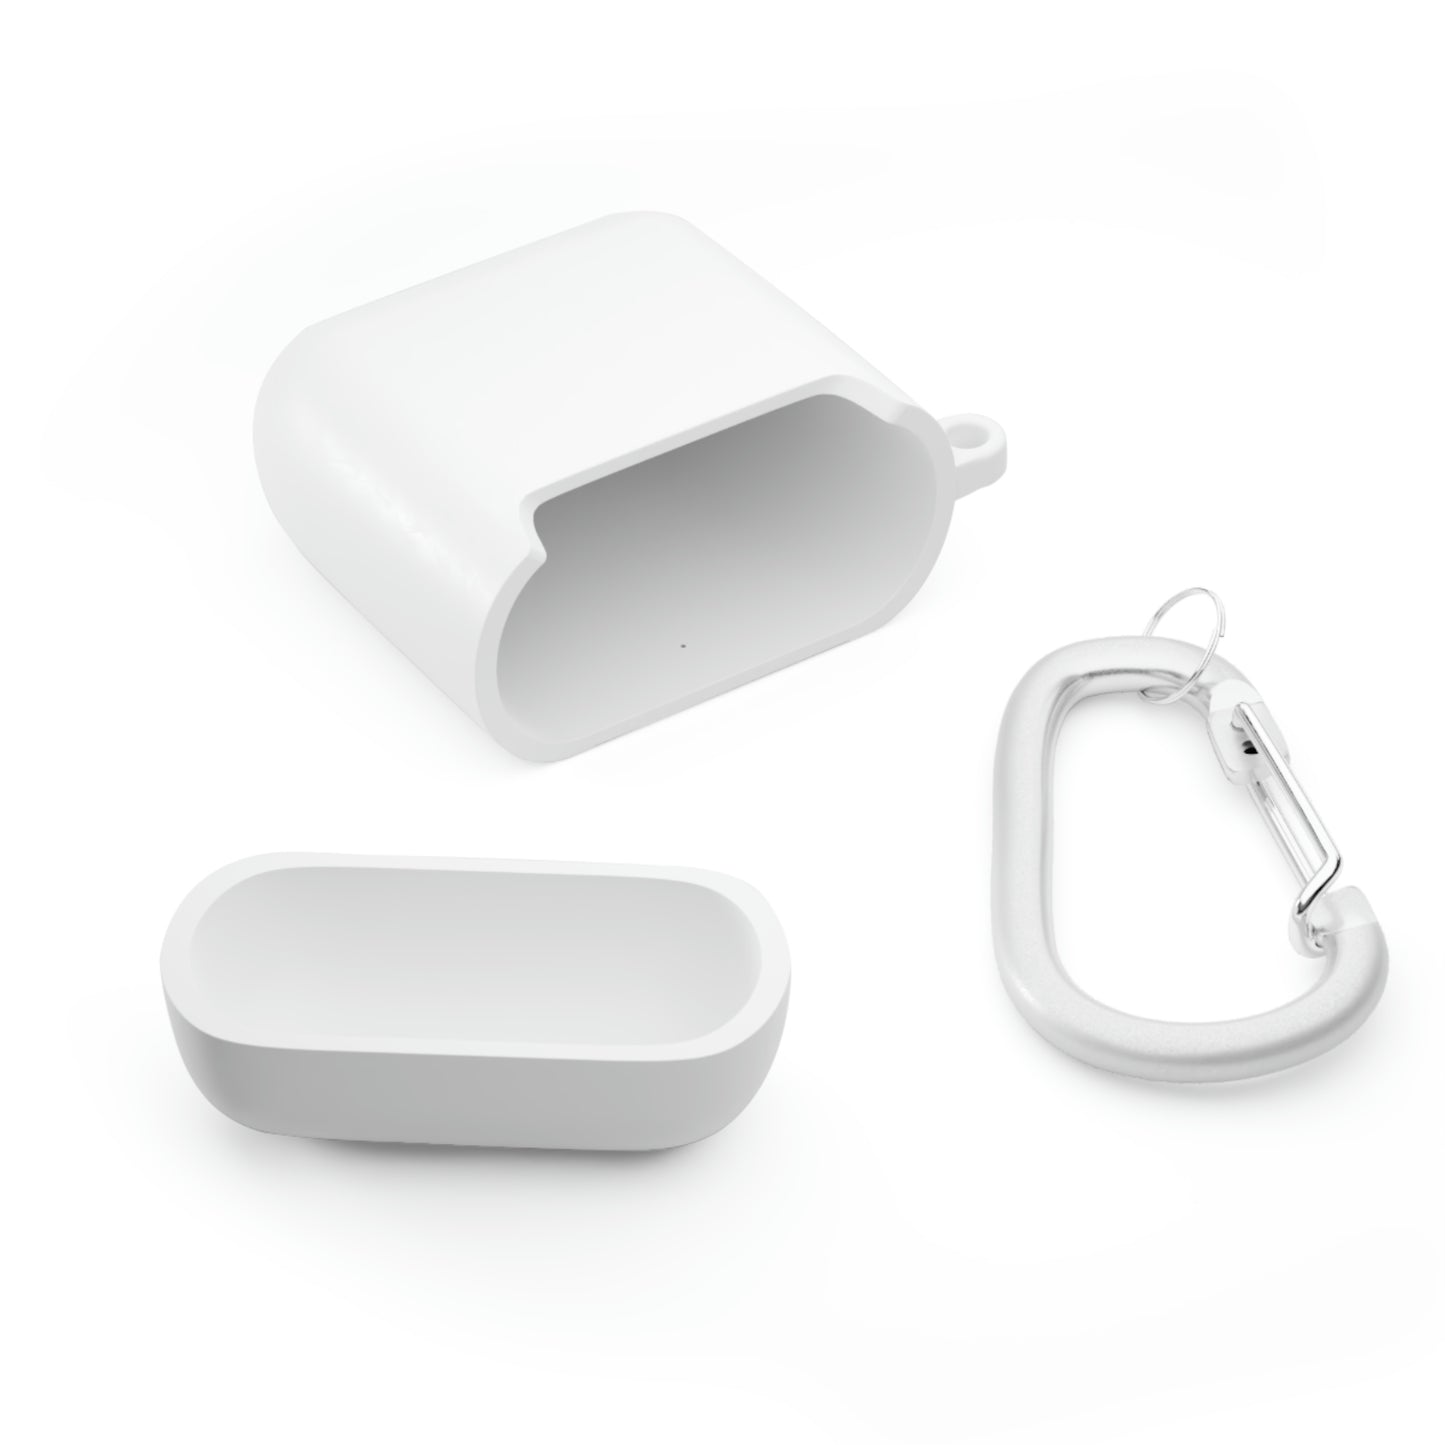 Overcomer, God's Strength Is Made Perfect In My Weakness AirPods / Airpods Pro Case cover